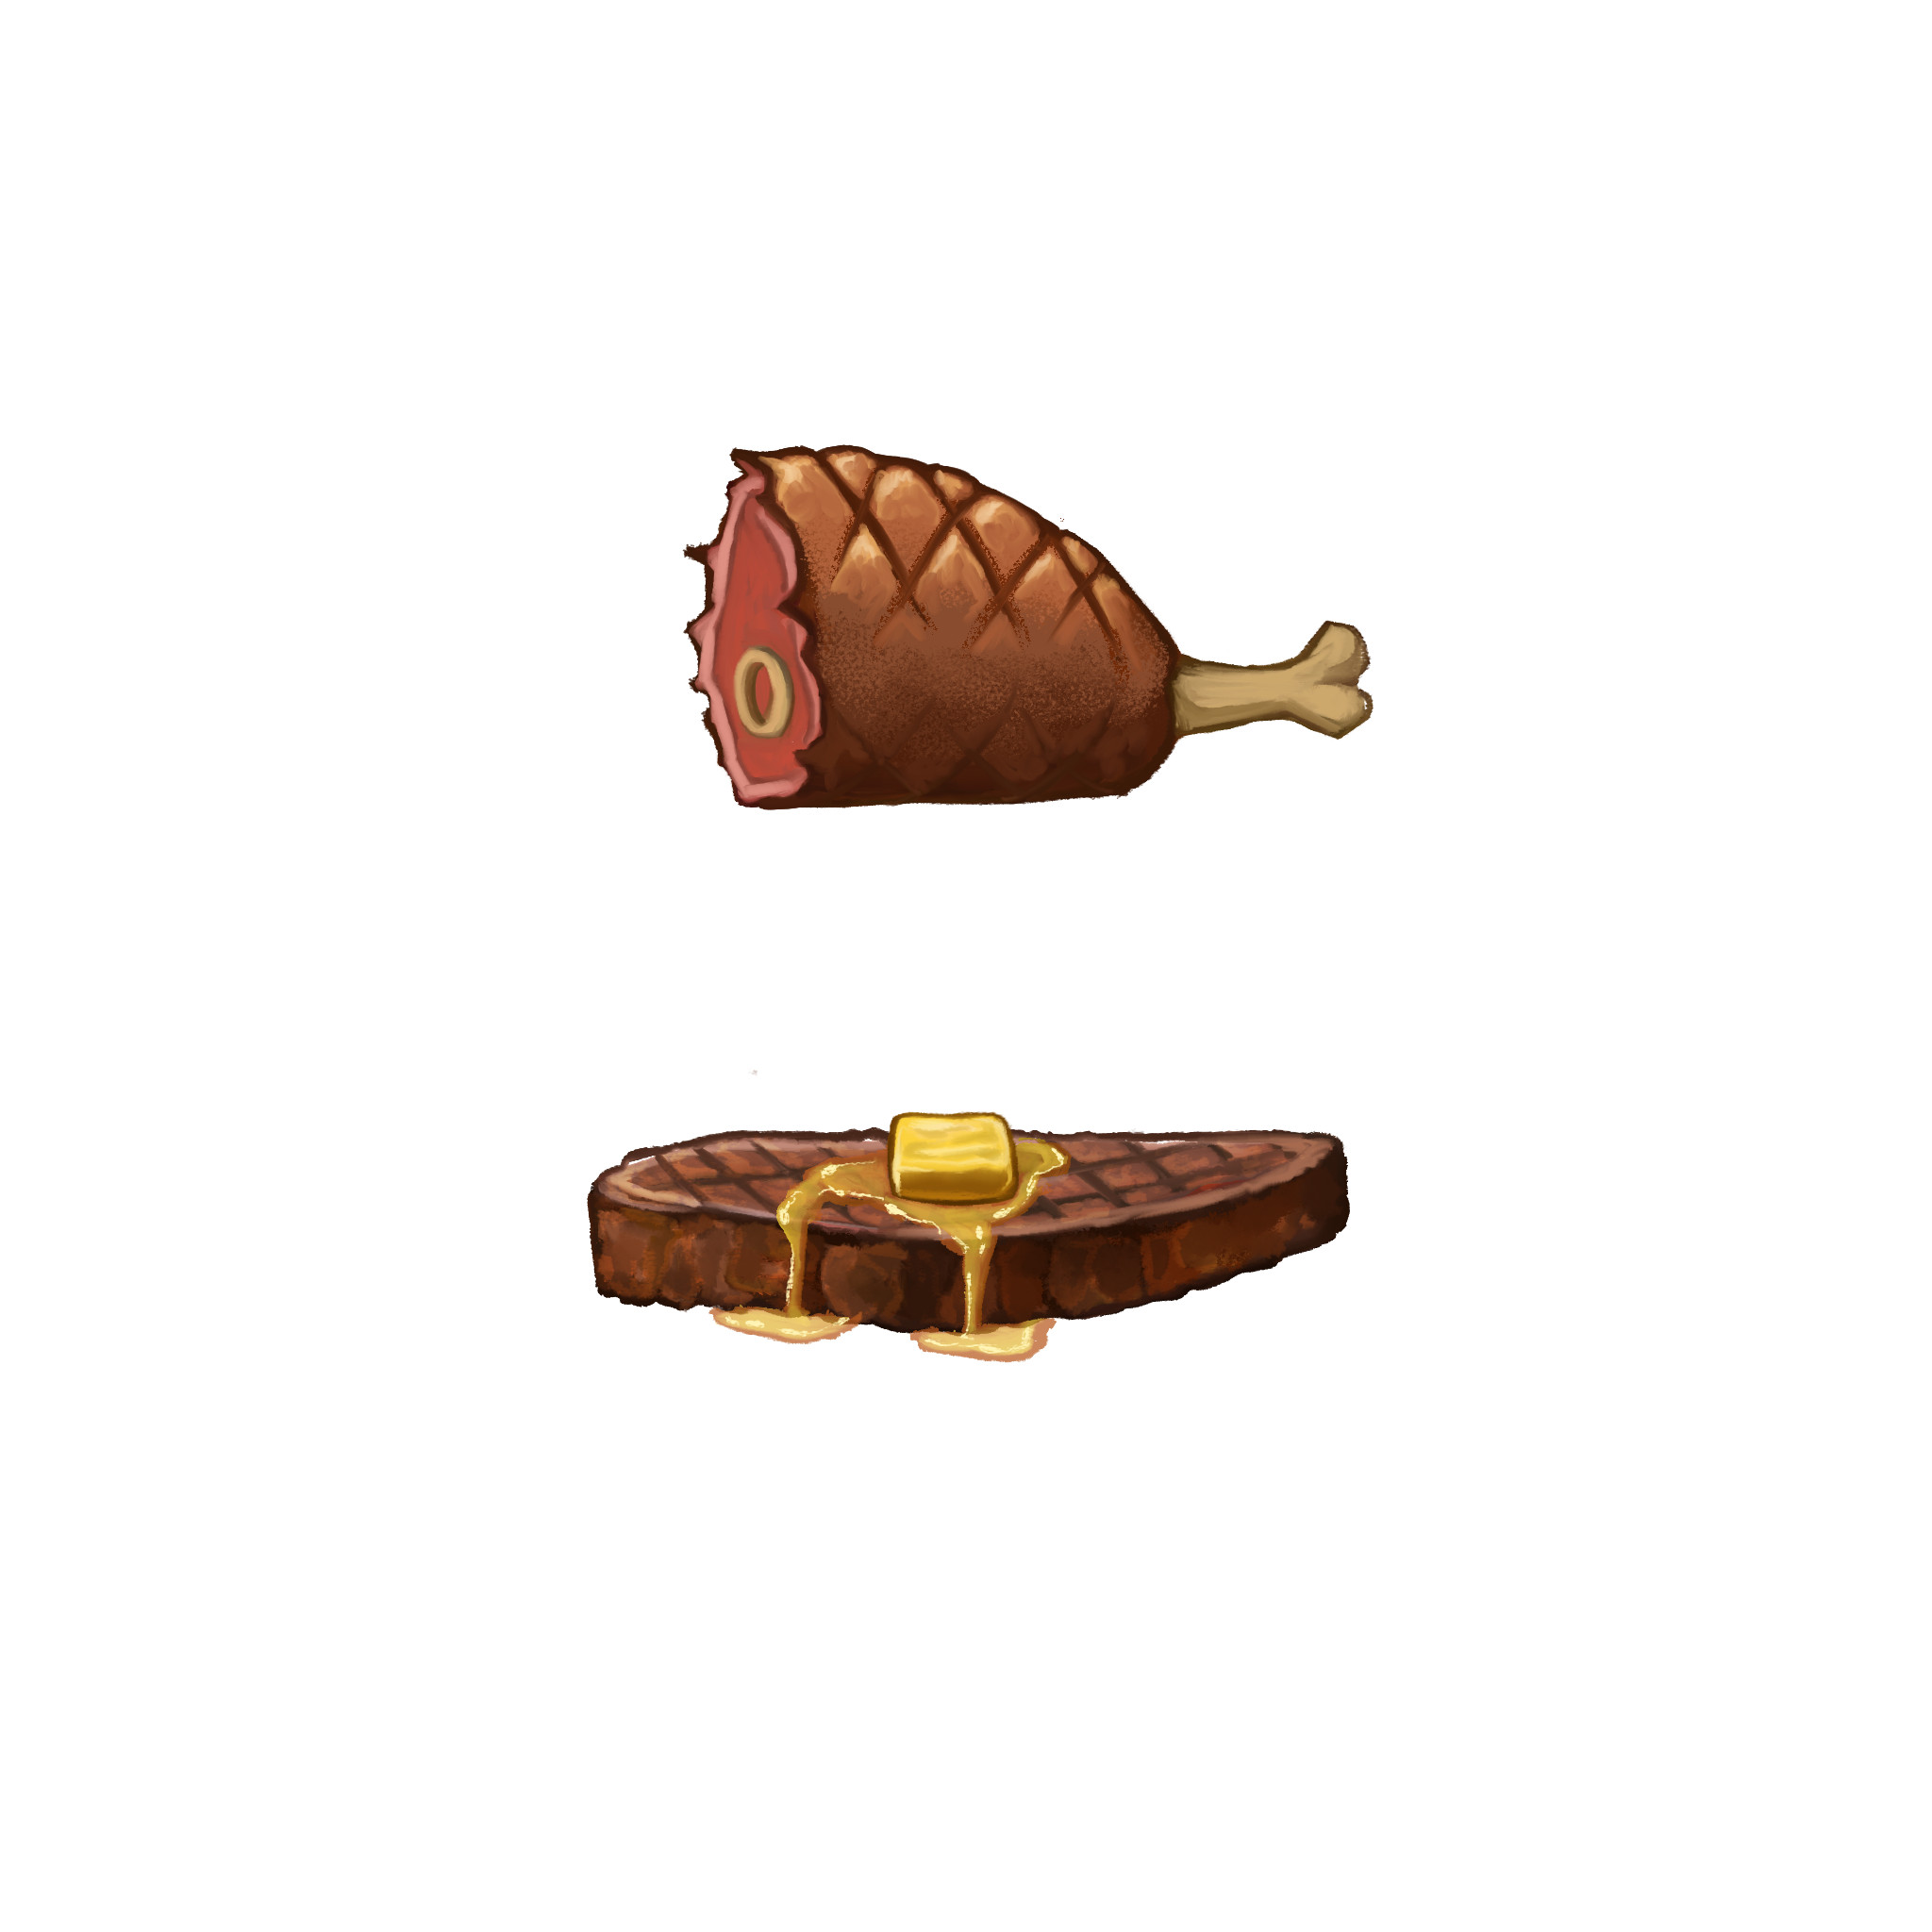 More concept art of the ham, and the steak that (sadly) did not make it to the final scene.